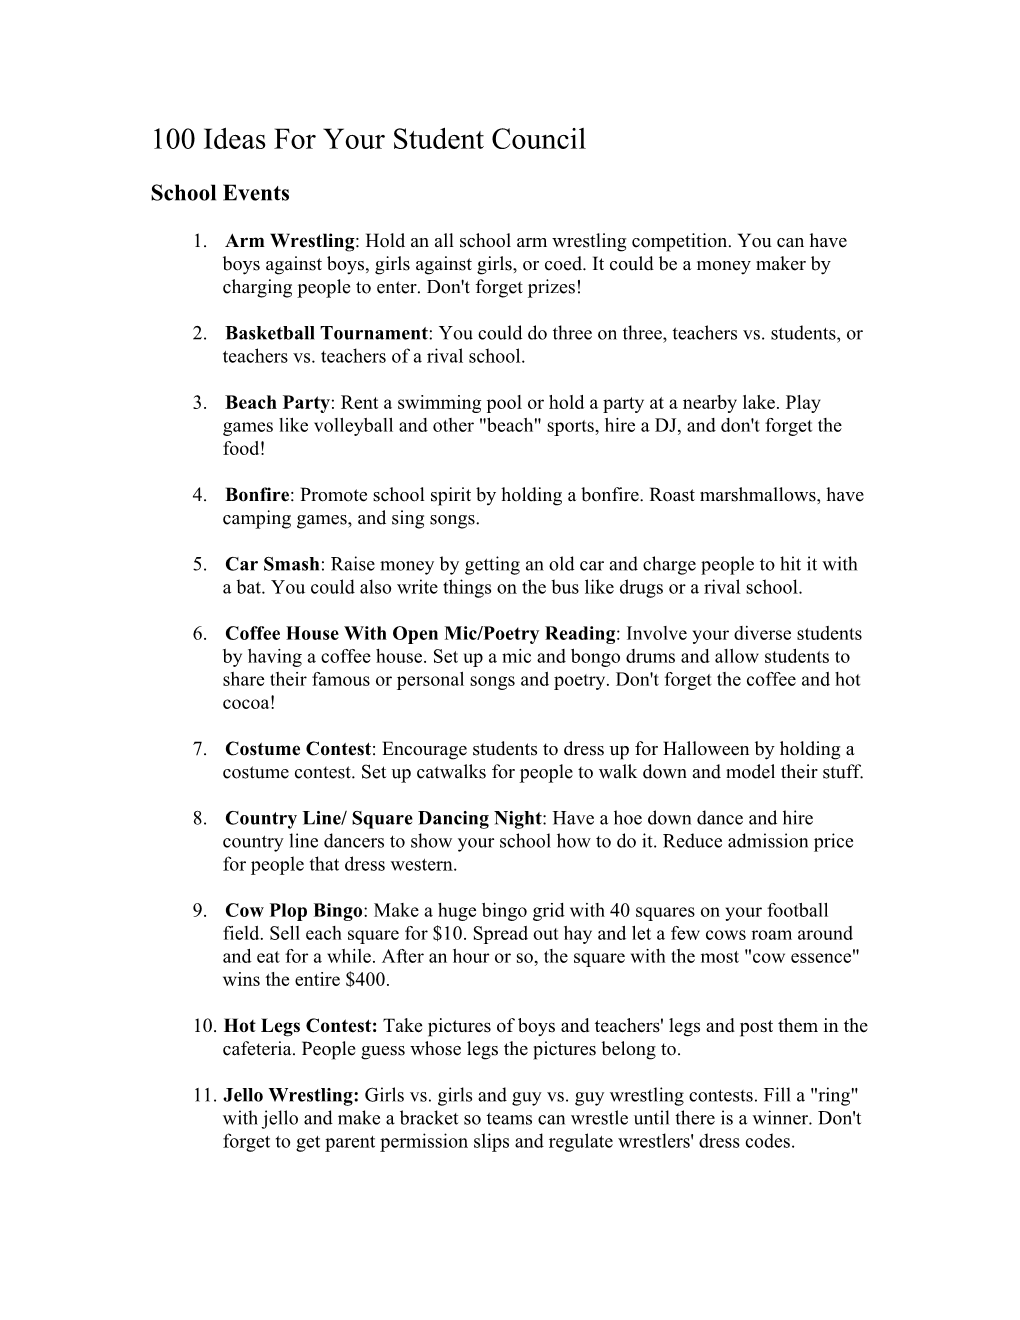 100 Ideas for Your Student Council